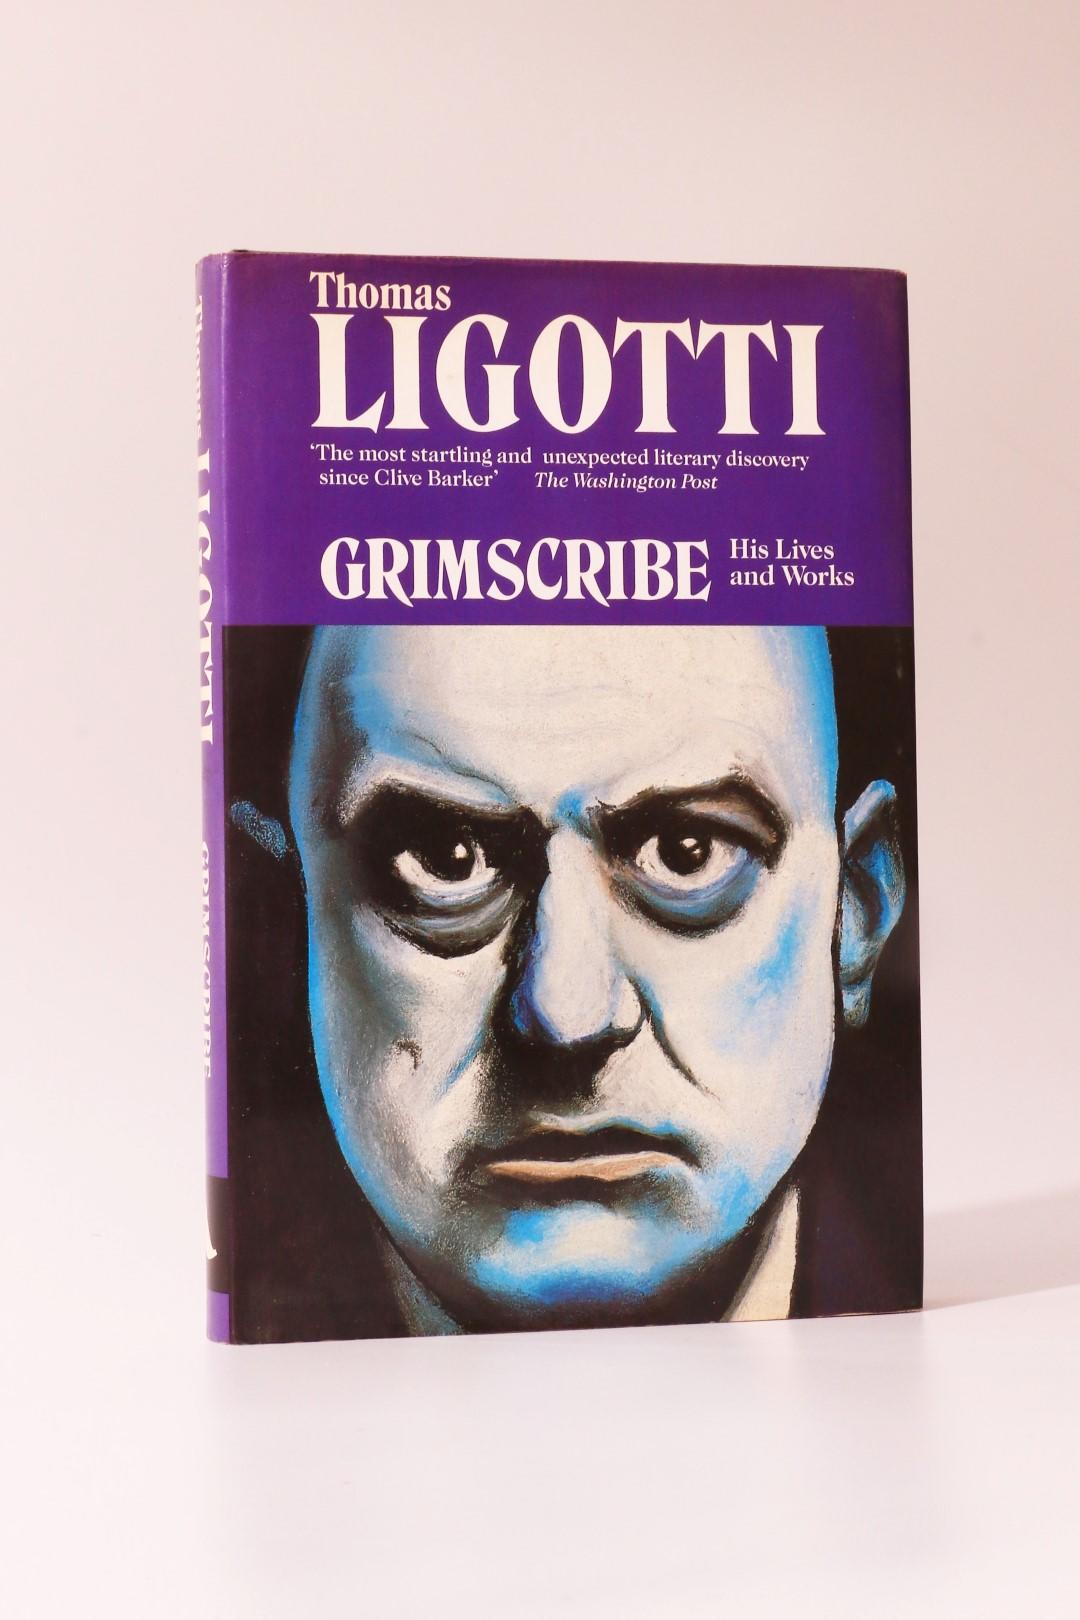 Thomas Ligotti - Grimscribe: His Lives and Works - Robinson Publishing, 1991, First Edition.